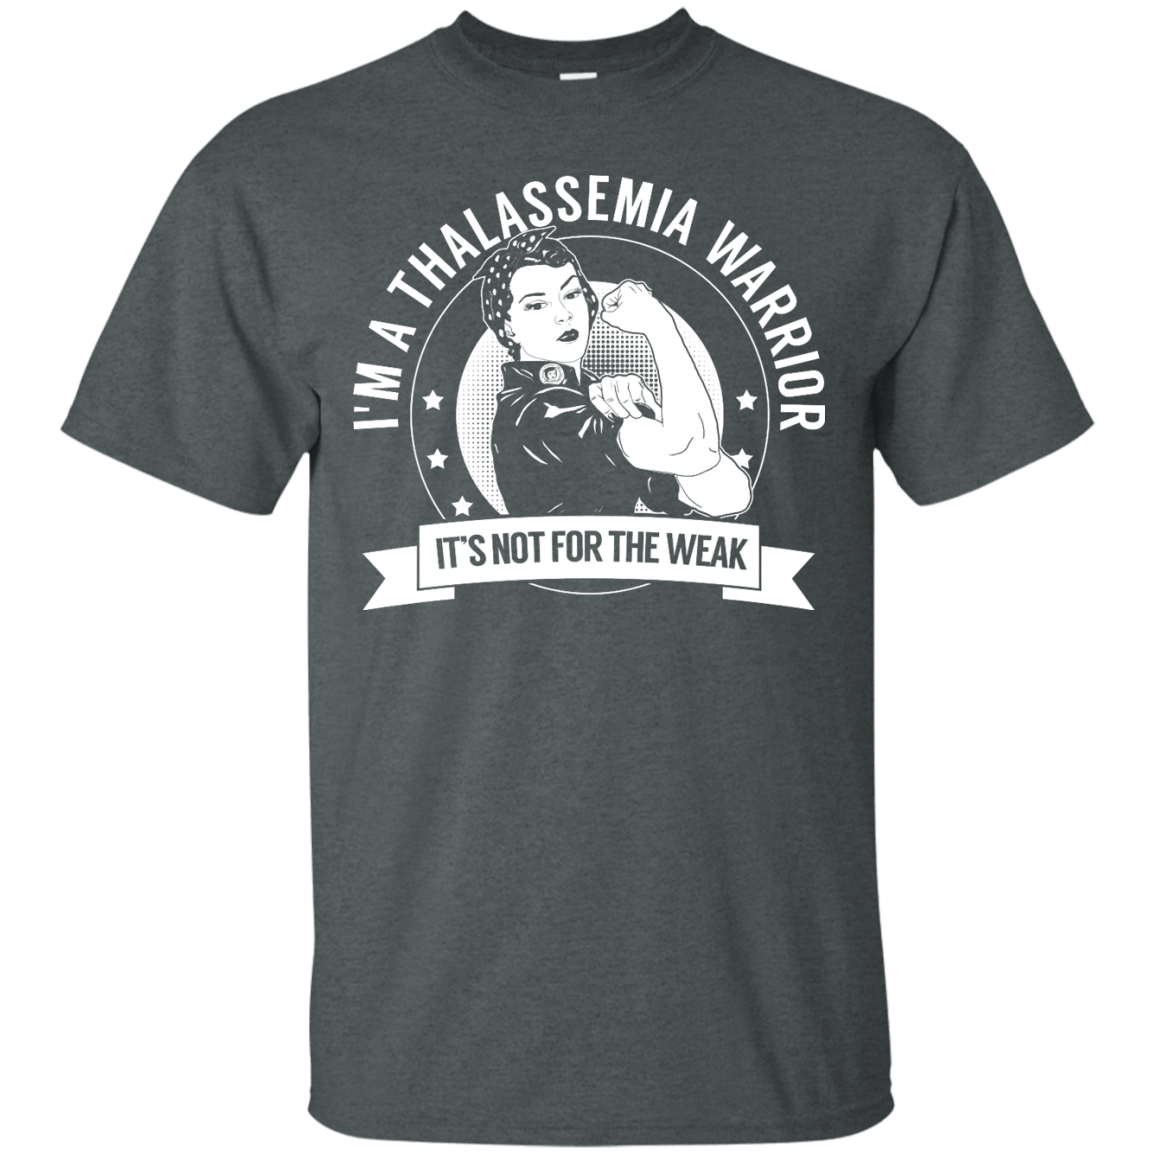 Thalassemia Warrior Not For The Weak Unisex Shirt - The Unchargeables